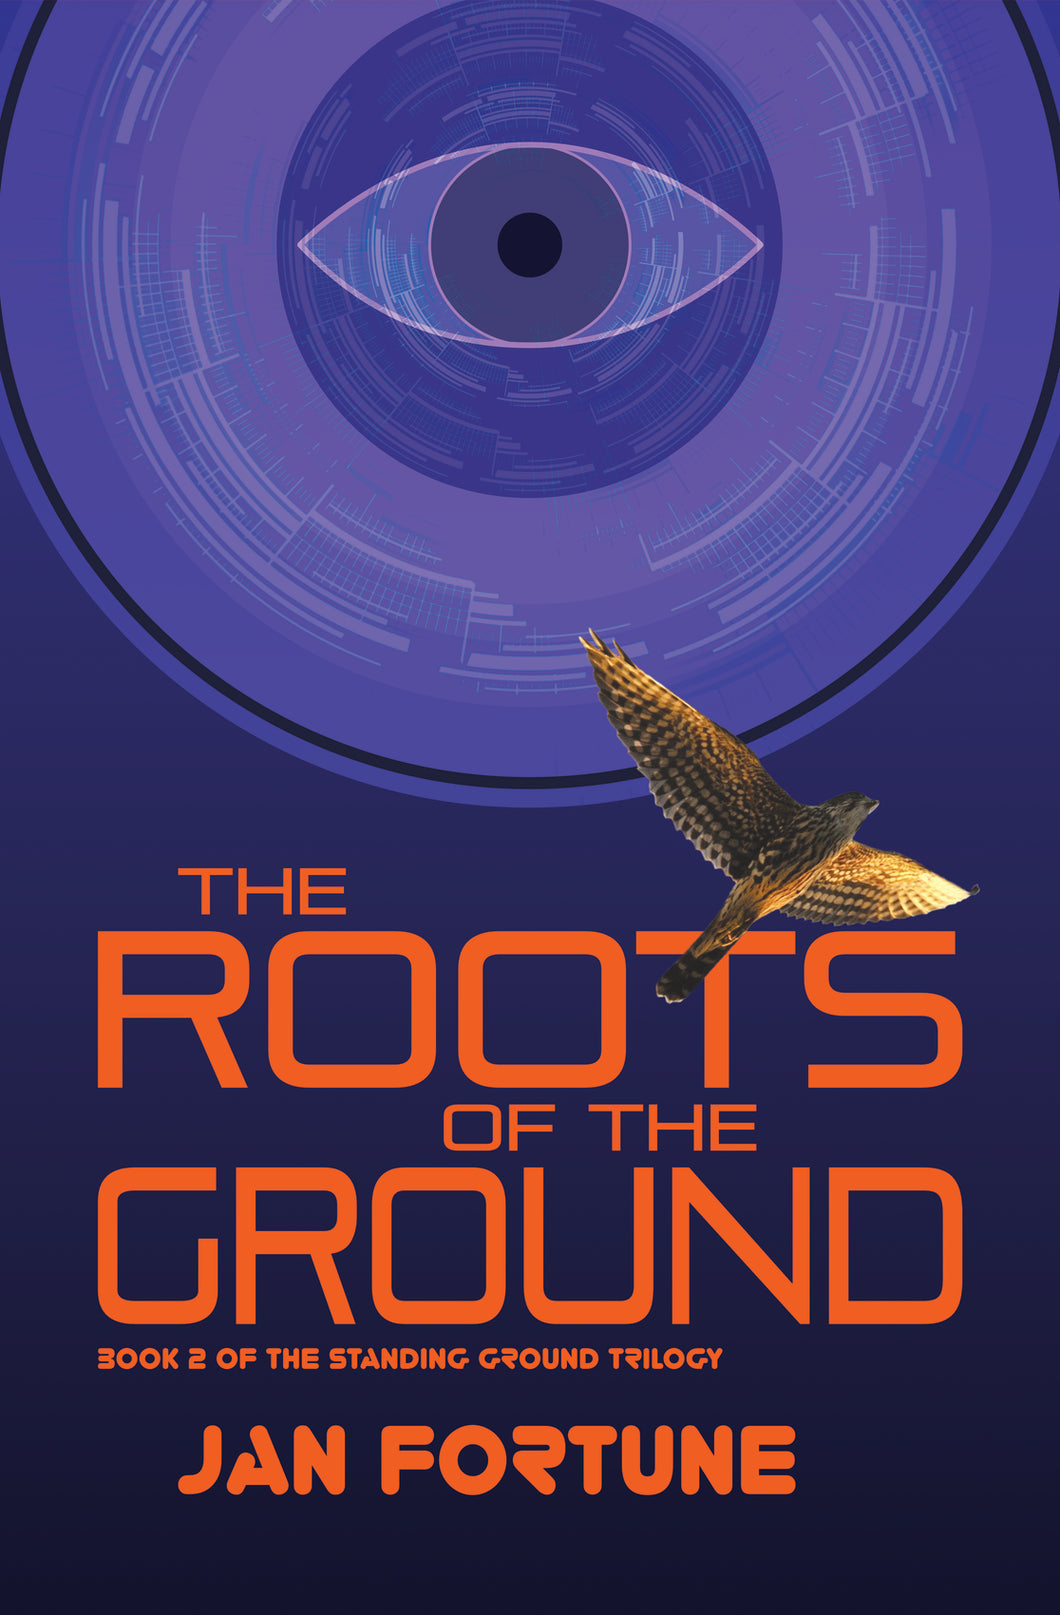 The Roots of the Ground